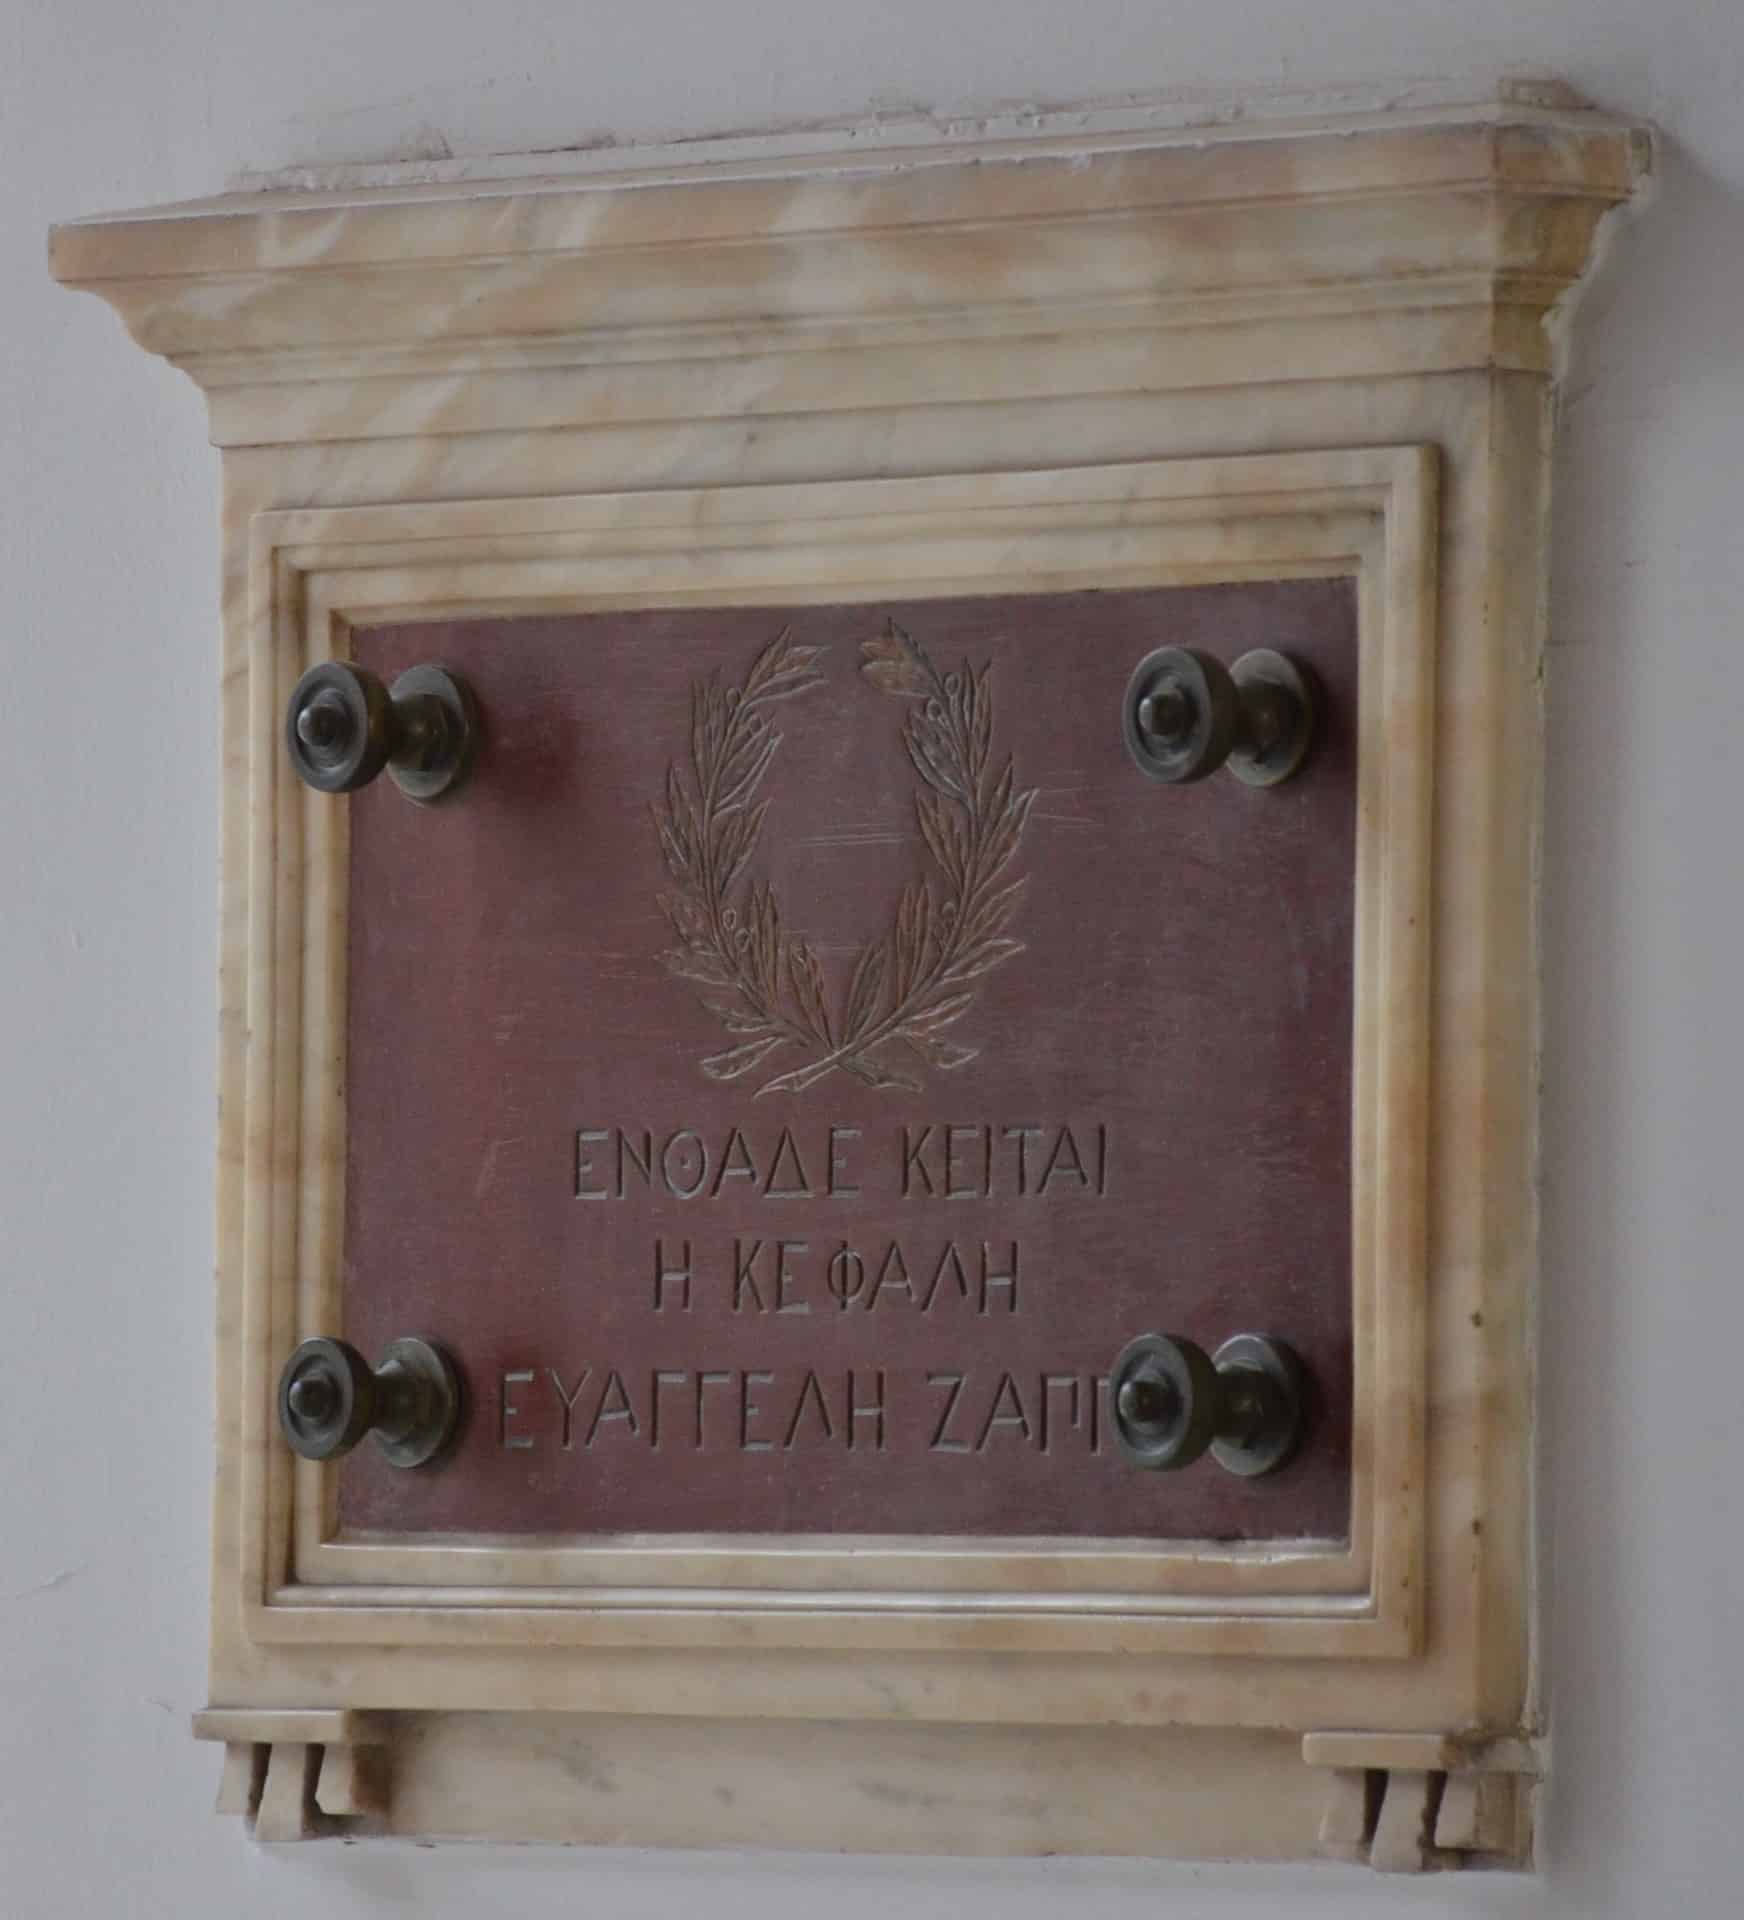 Box containing the head of Evangelis Zappas at the Zappeion in Athens, Greece